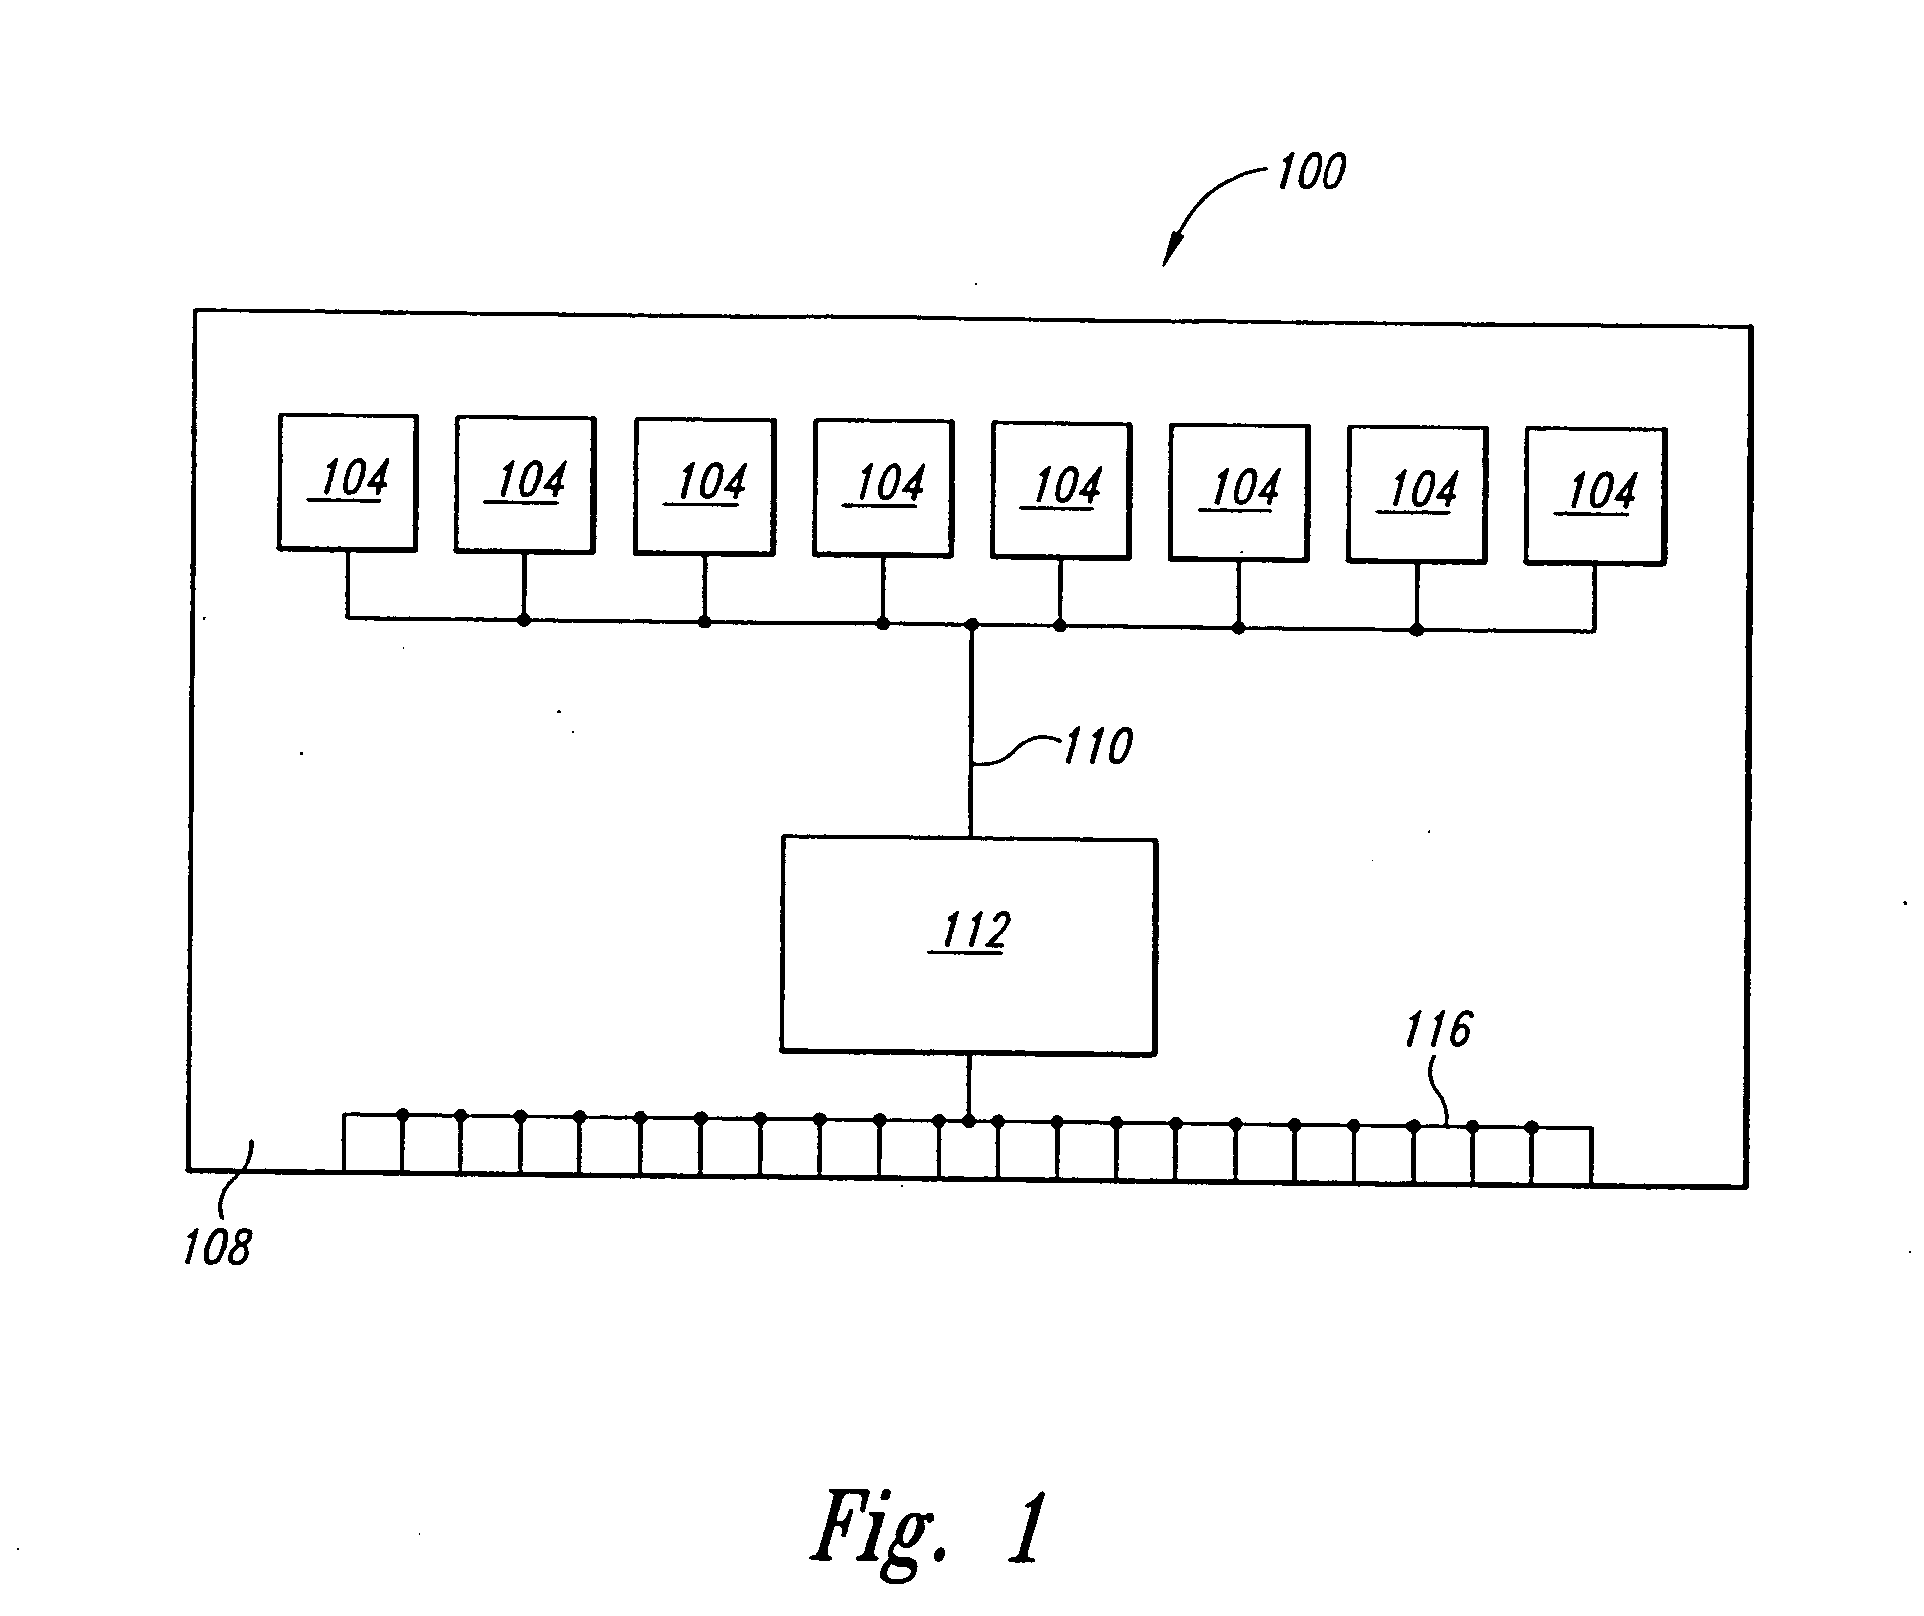 System and method for selective memory module power management